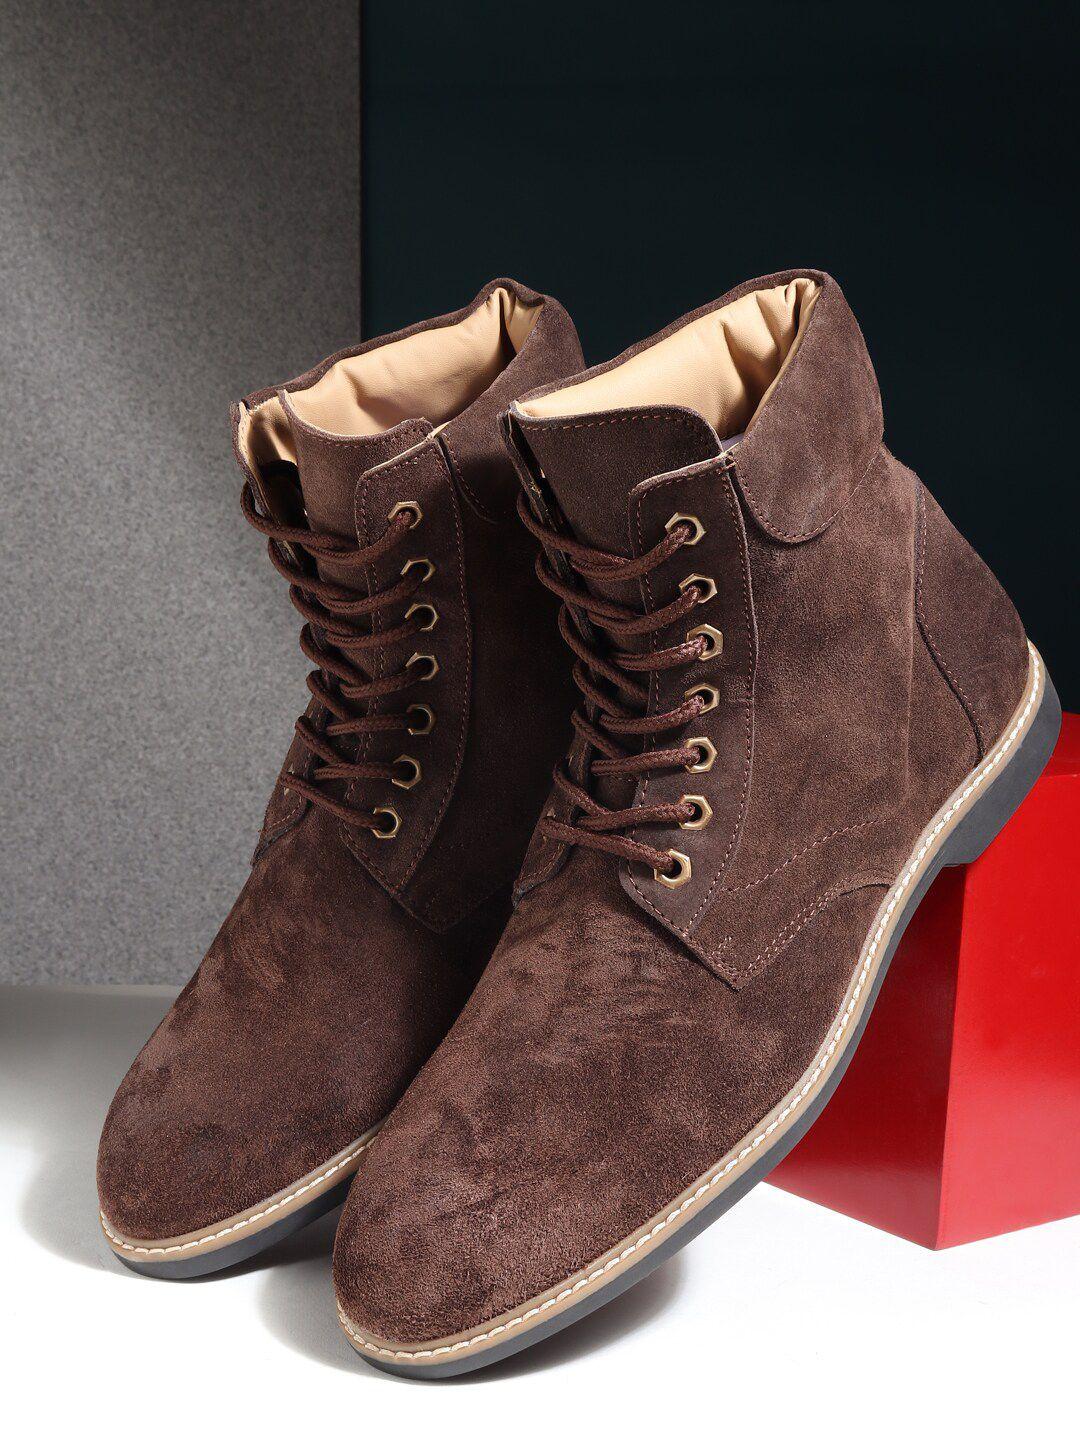 teakwood leathers men brown solid round toe suede mid-top flat lace-up boot